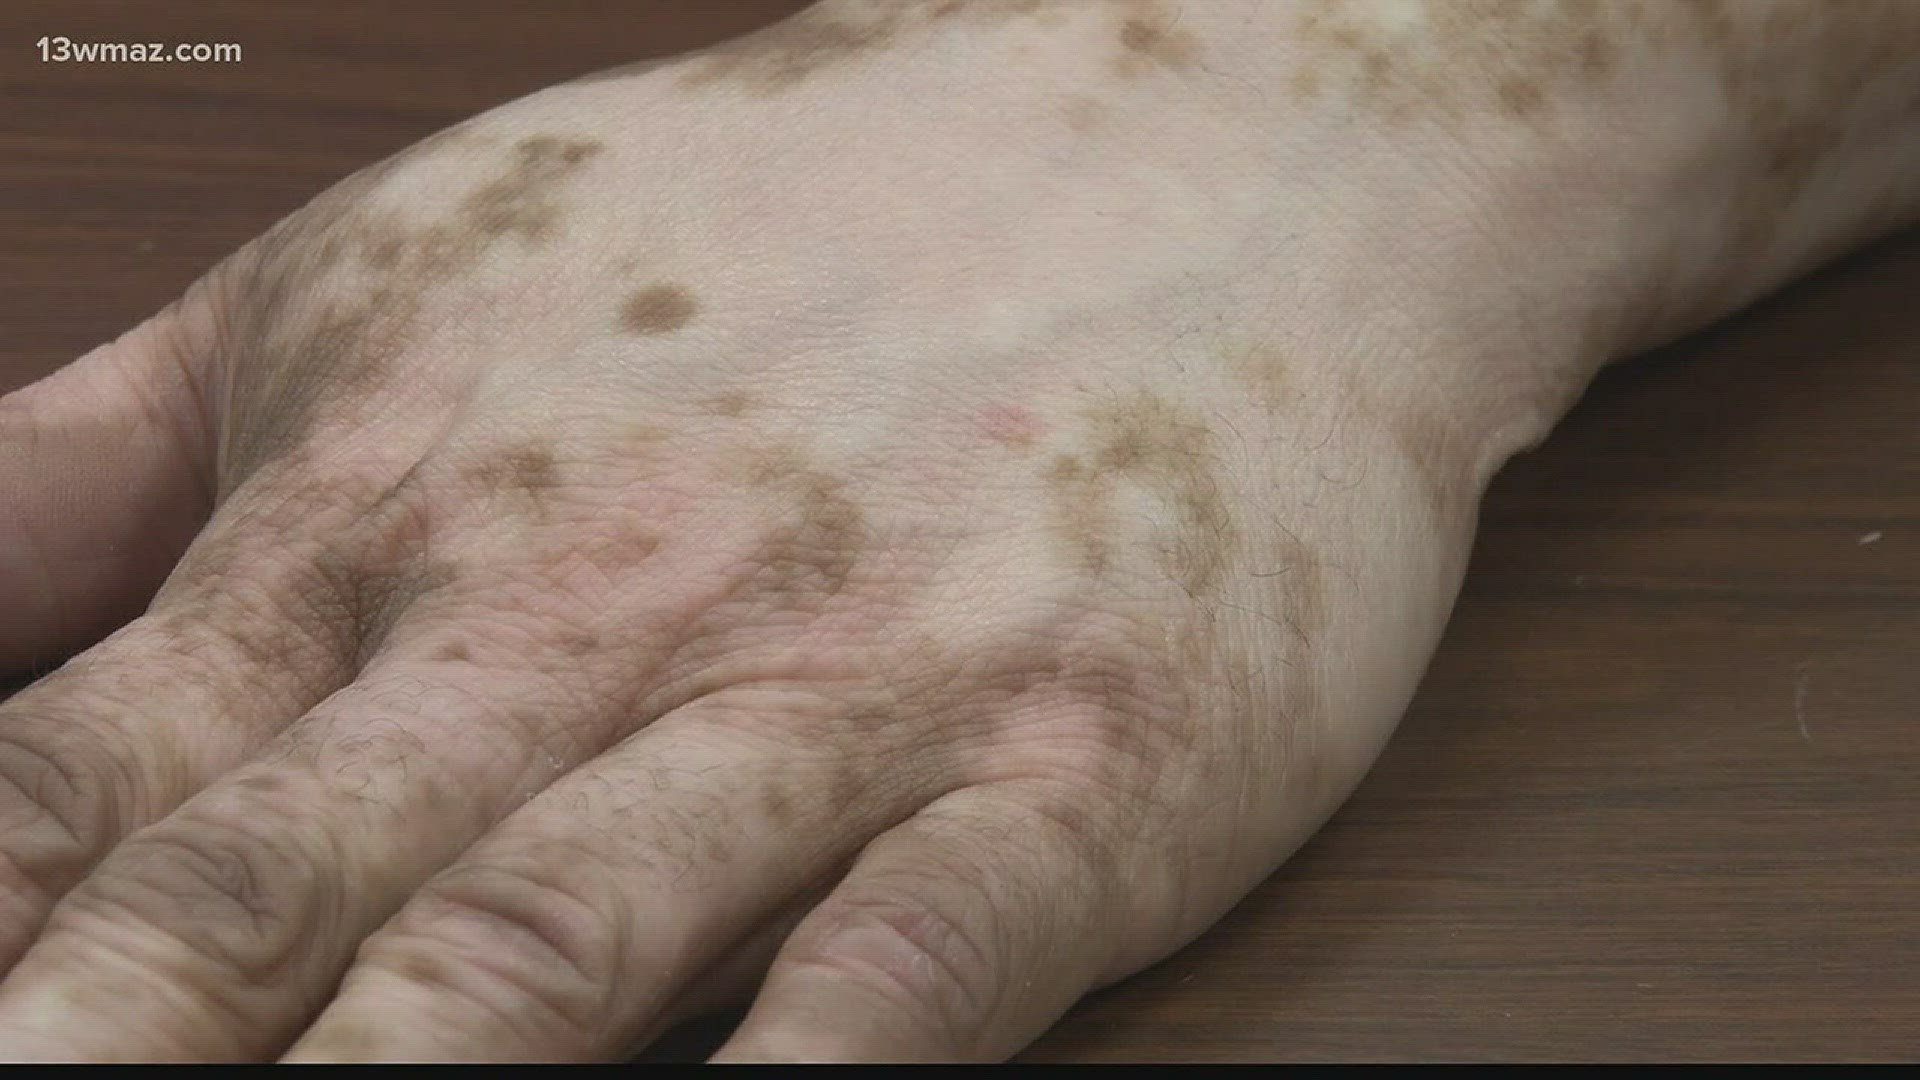 More than 200,000 people living with vitiligo